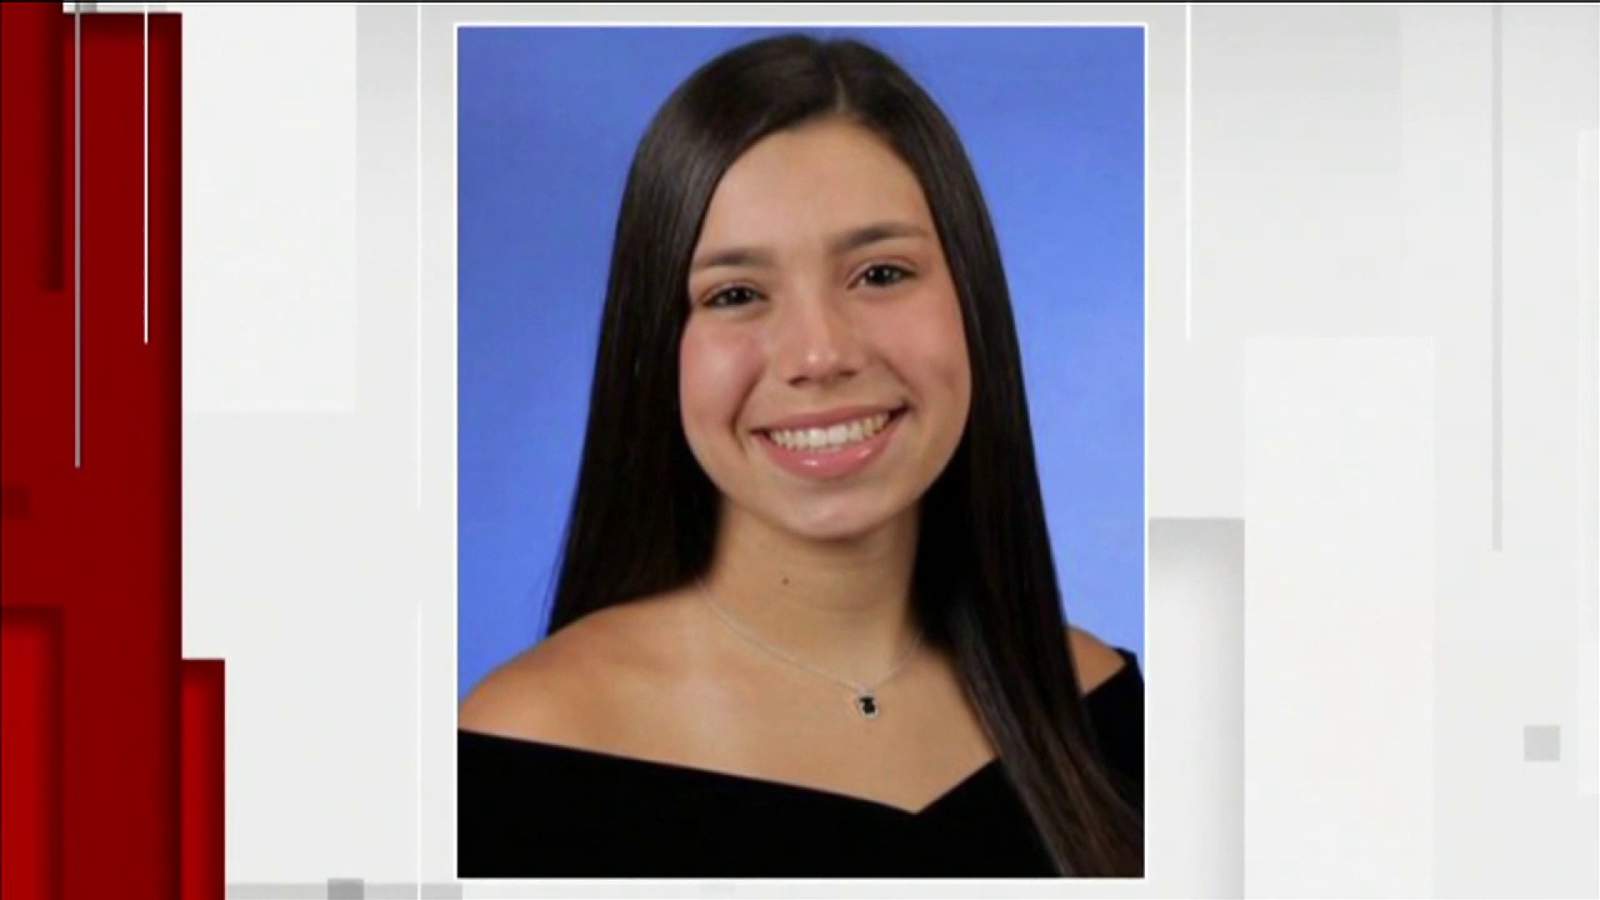 High school senior killed in Miami-Dade shooting had been accepted to nursing school